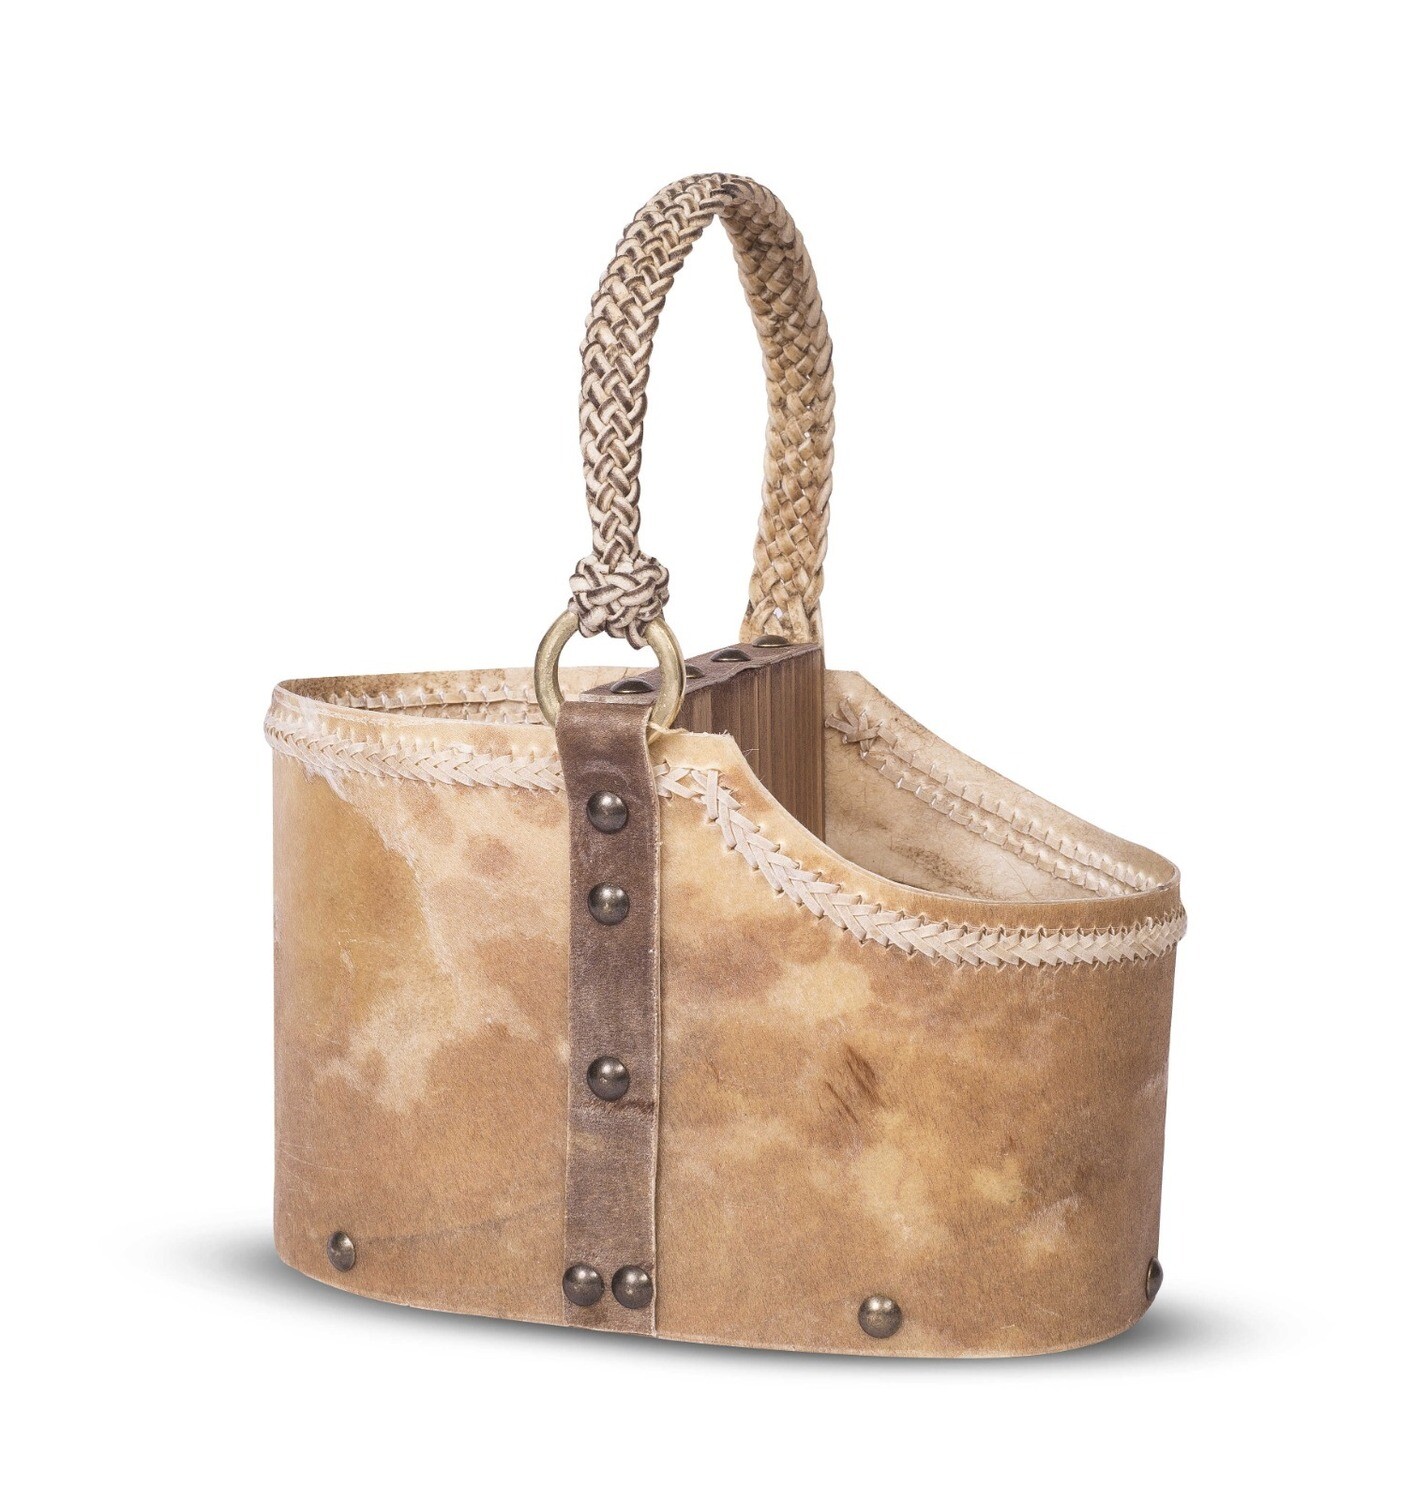 Raw leather mate bag